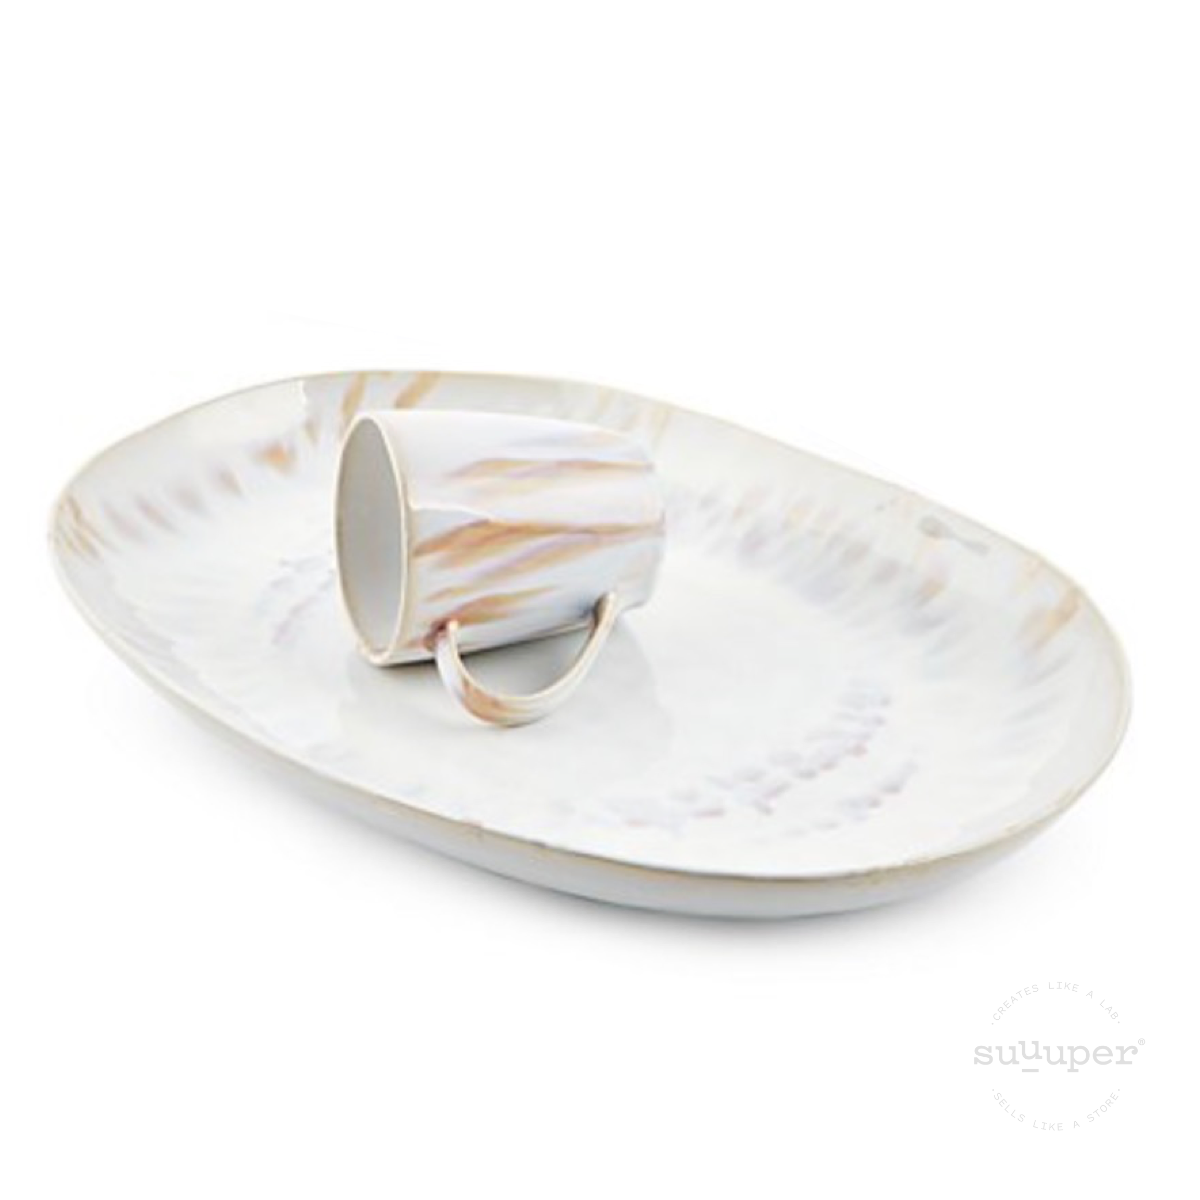 REACTIVE SHADES OVAL PLATTER by Suuuper